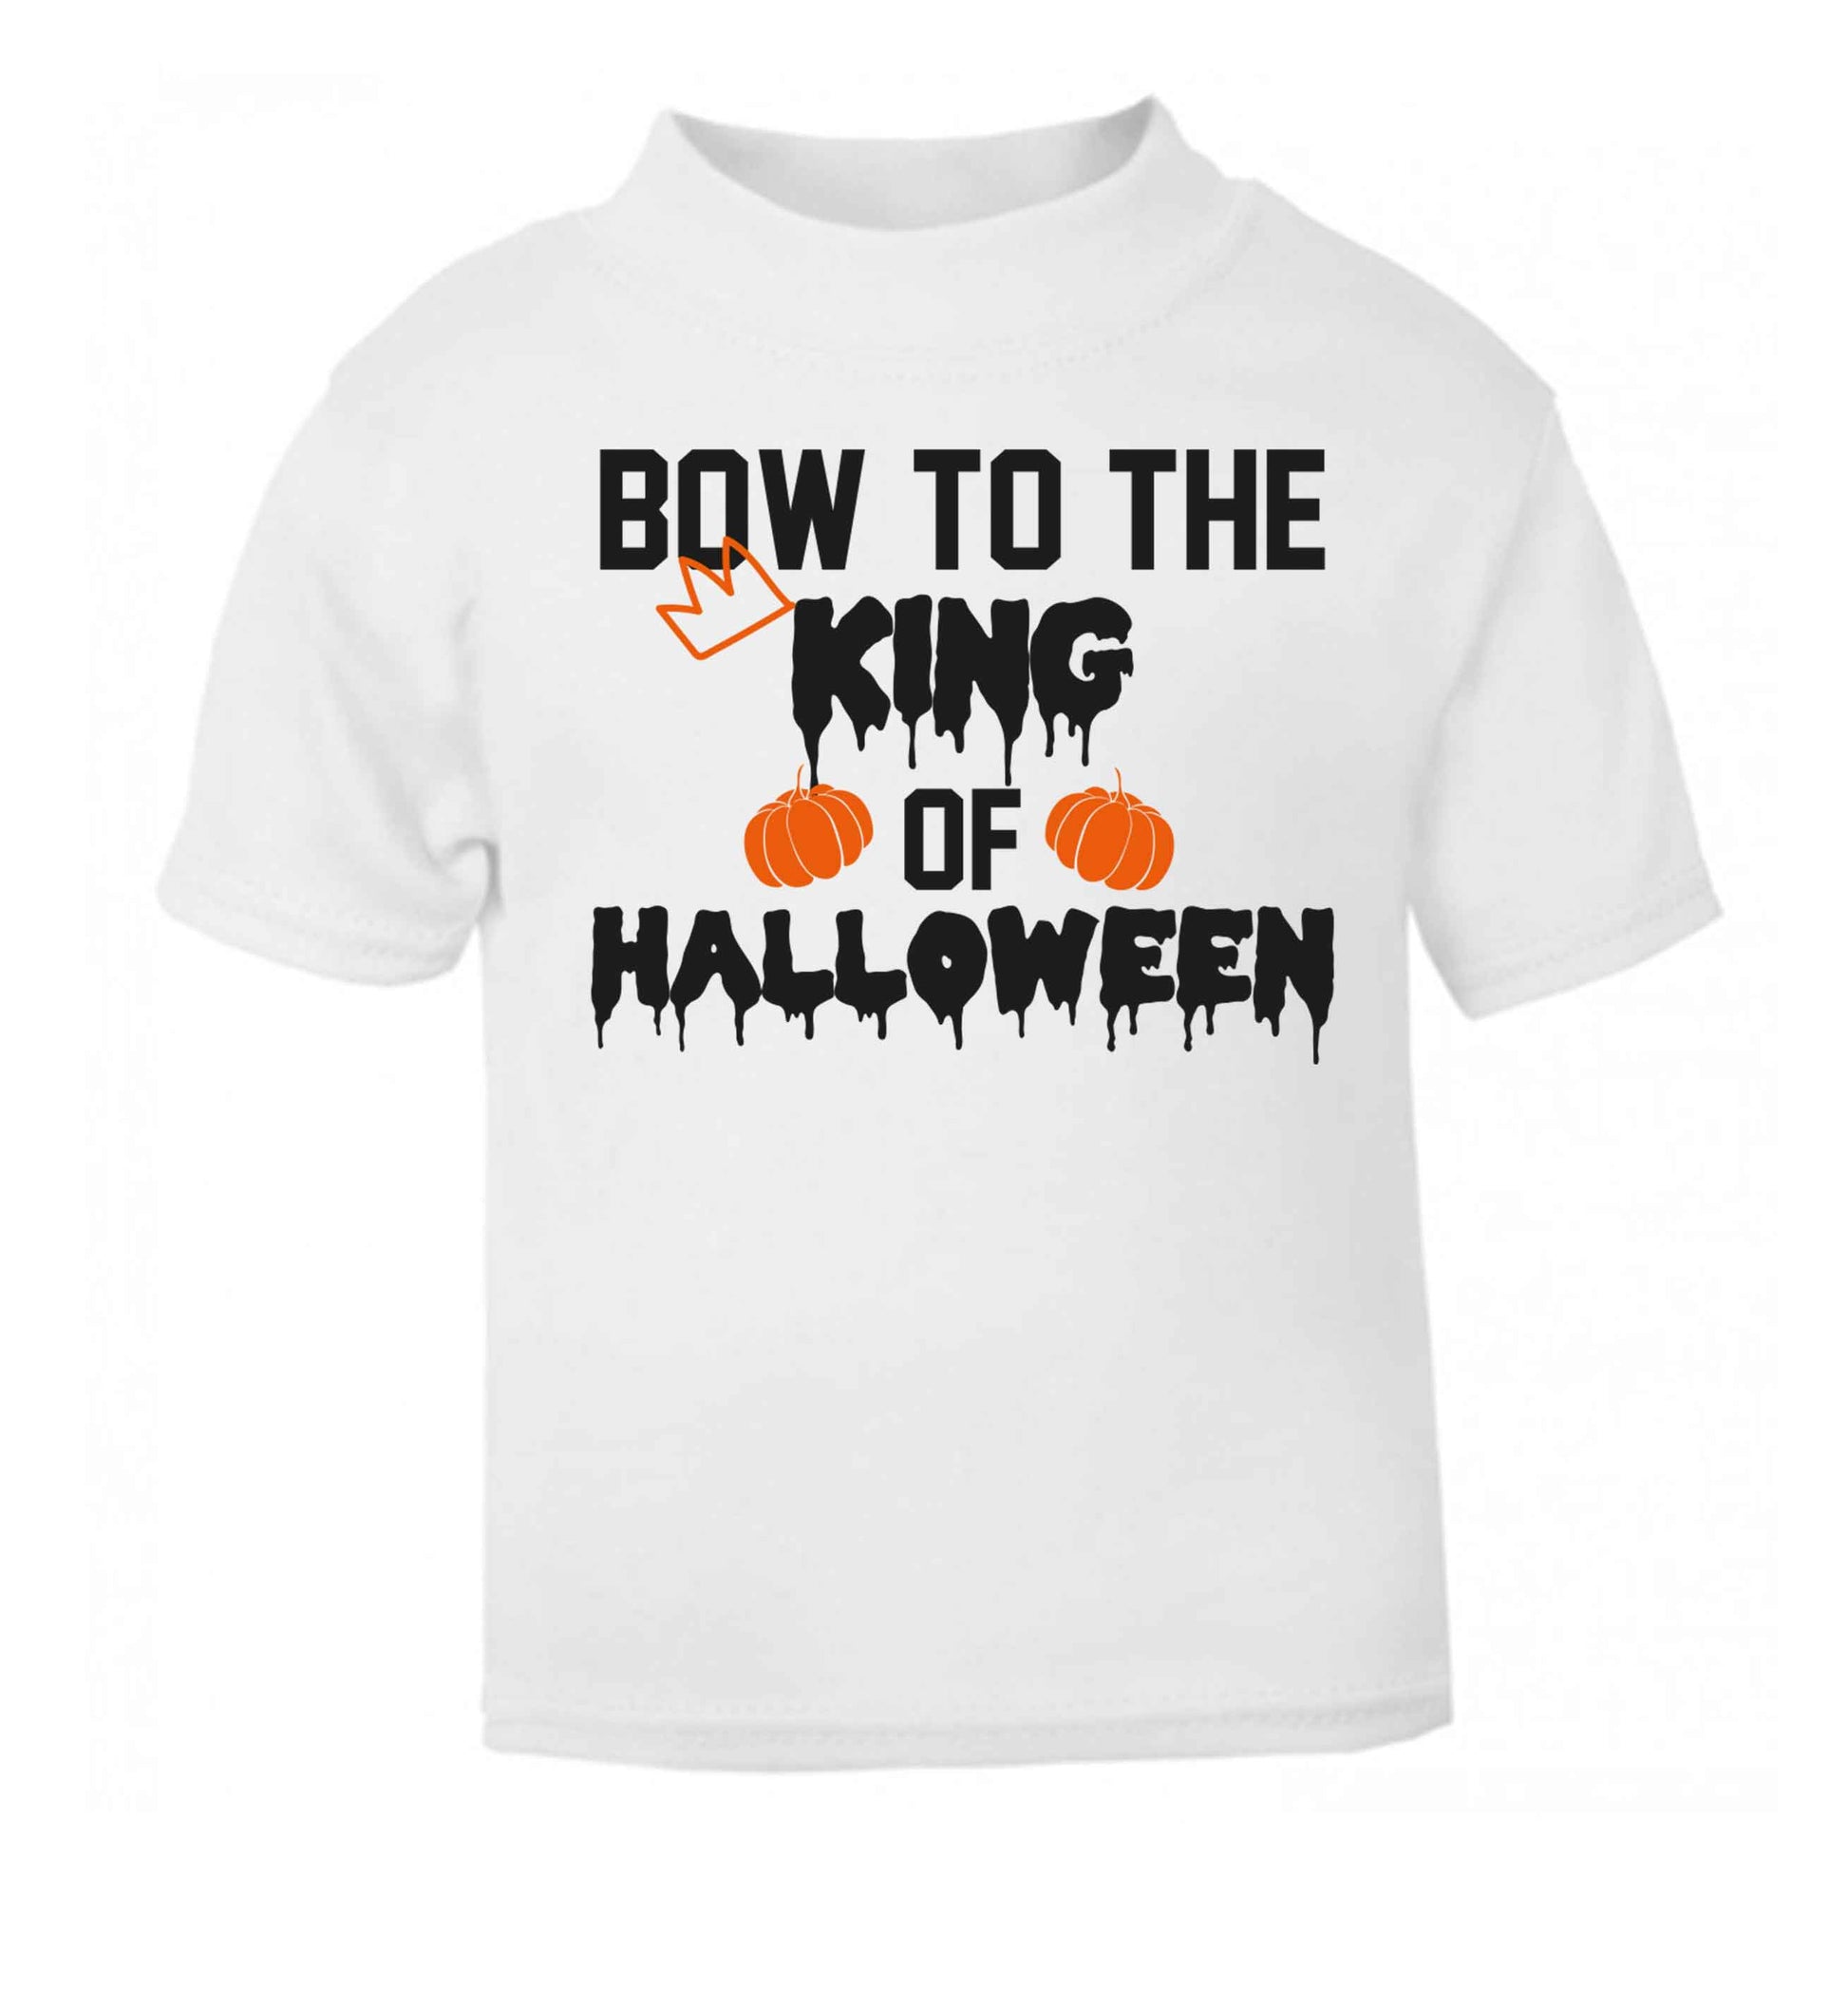 Bow to the King of halloween white baby toddler Tshirt 2 Years